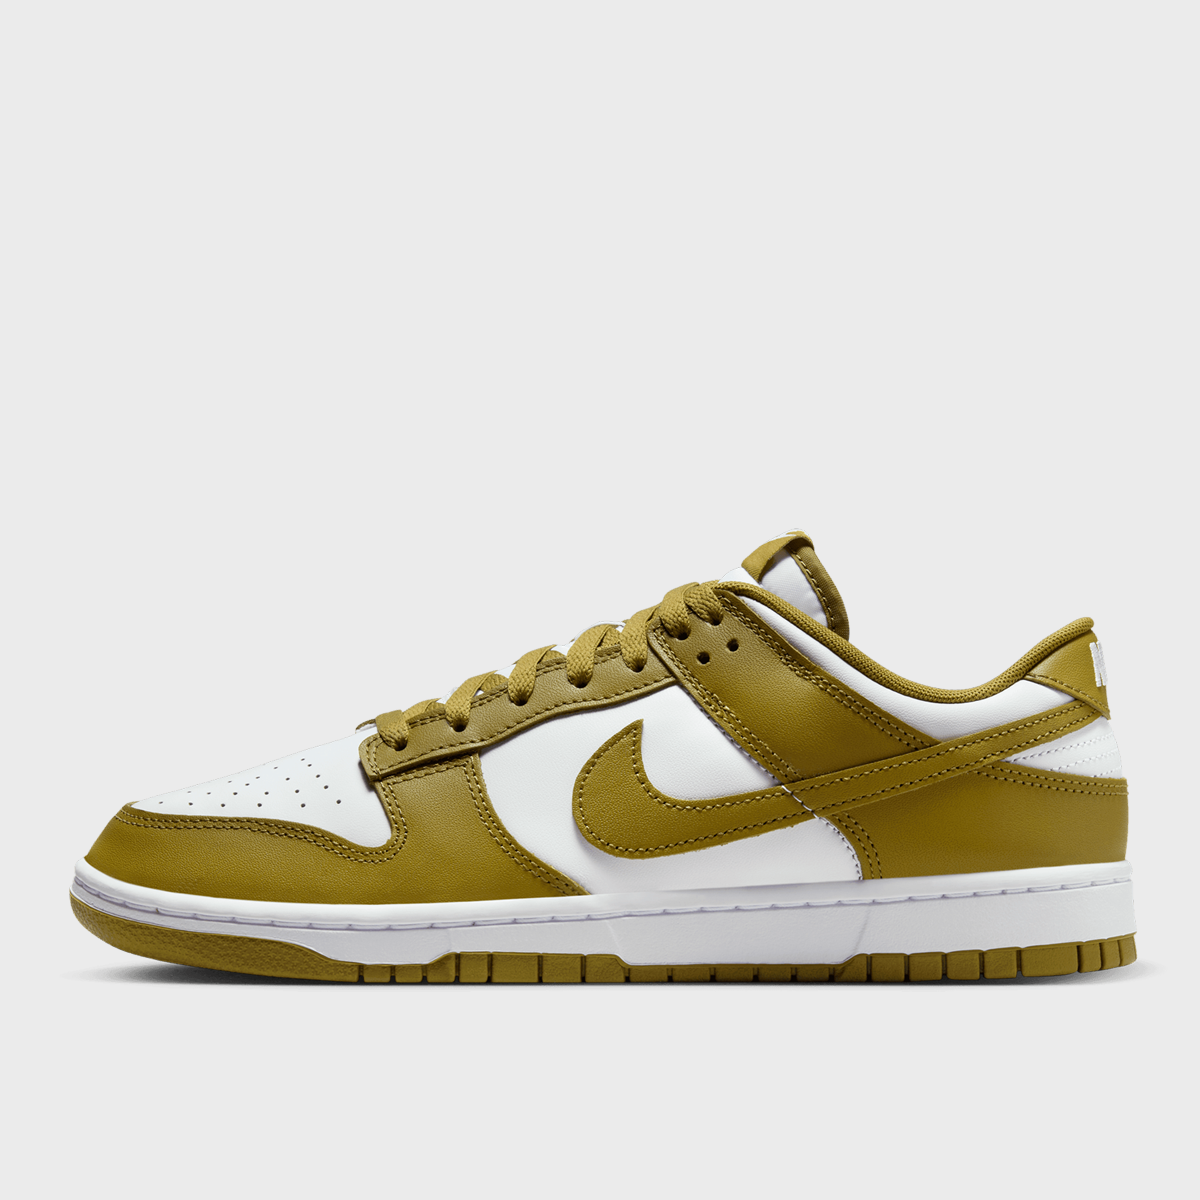 Dunk Low Retro, NIKE, Footwear, white/pacific moss, taille: 40